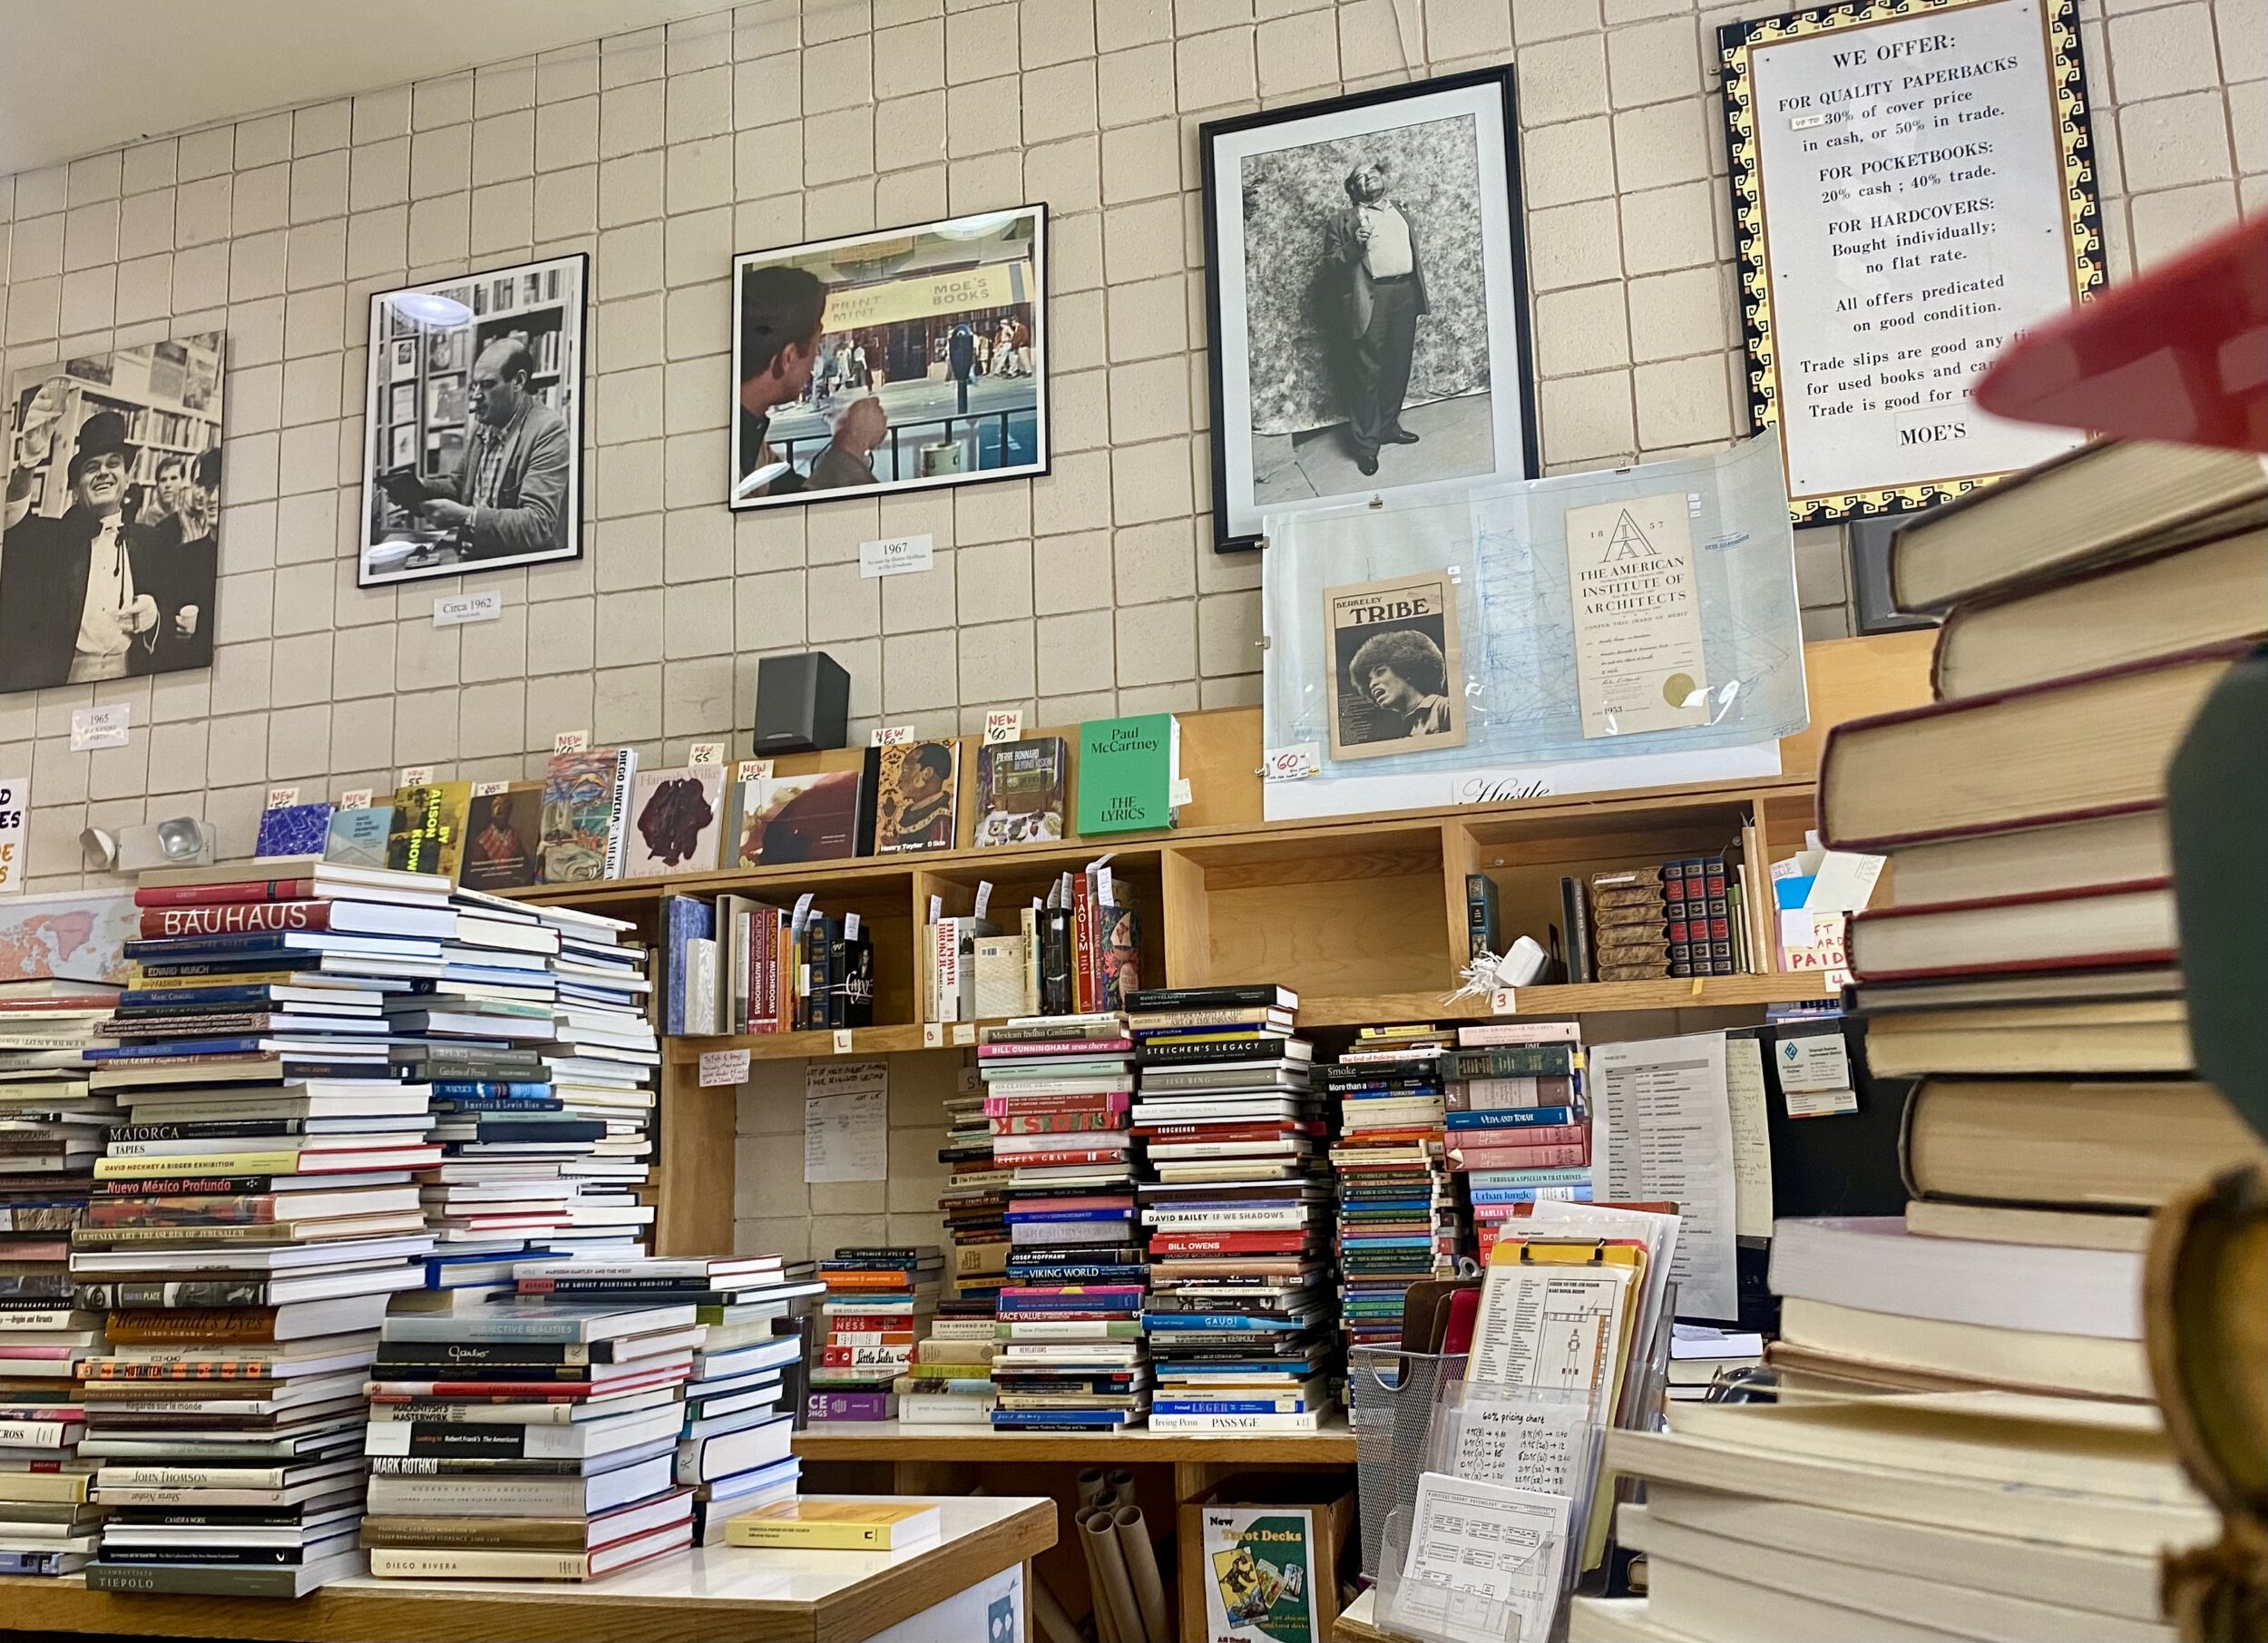 Stacks of books sit on tables with posters on the walls in the background.